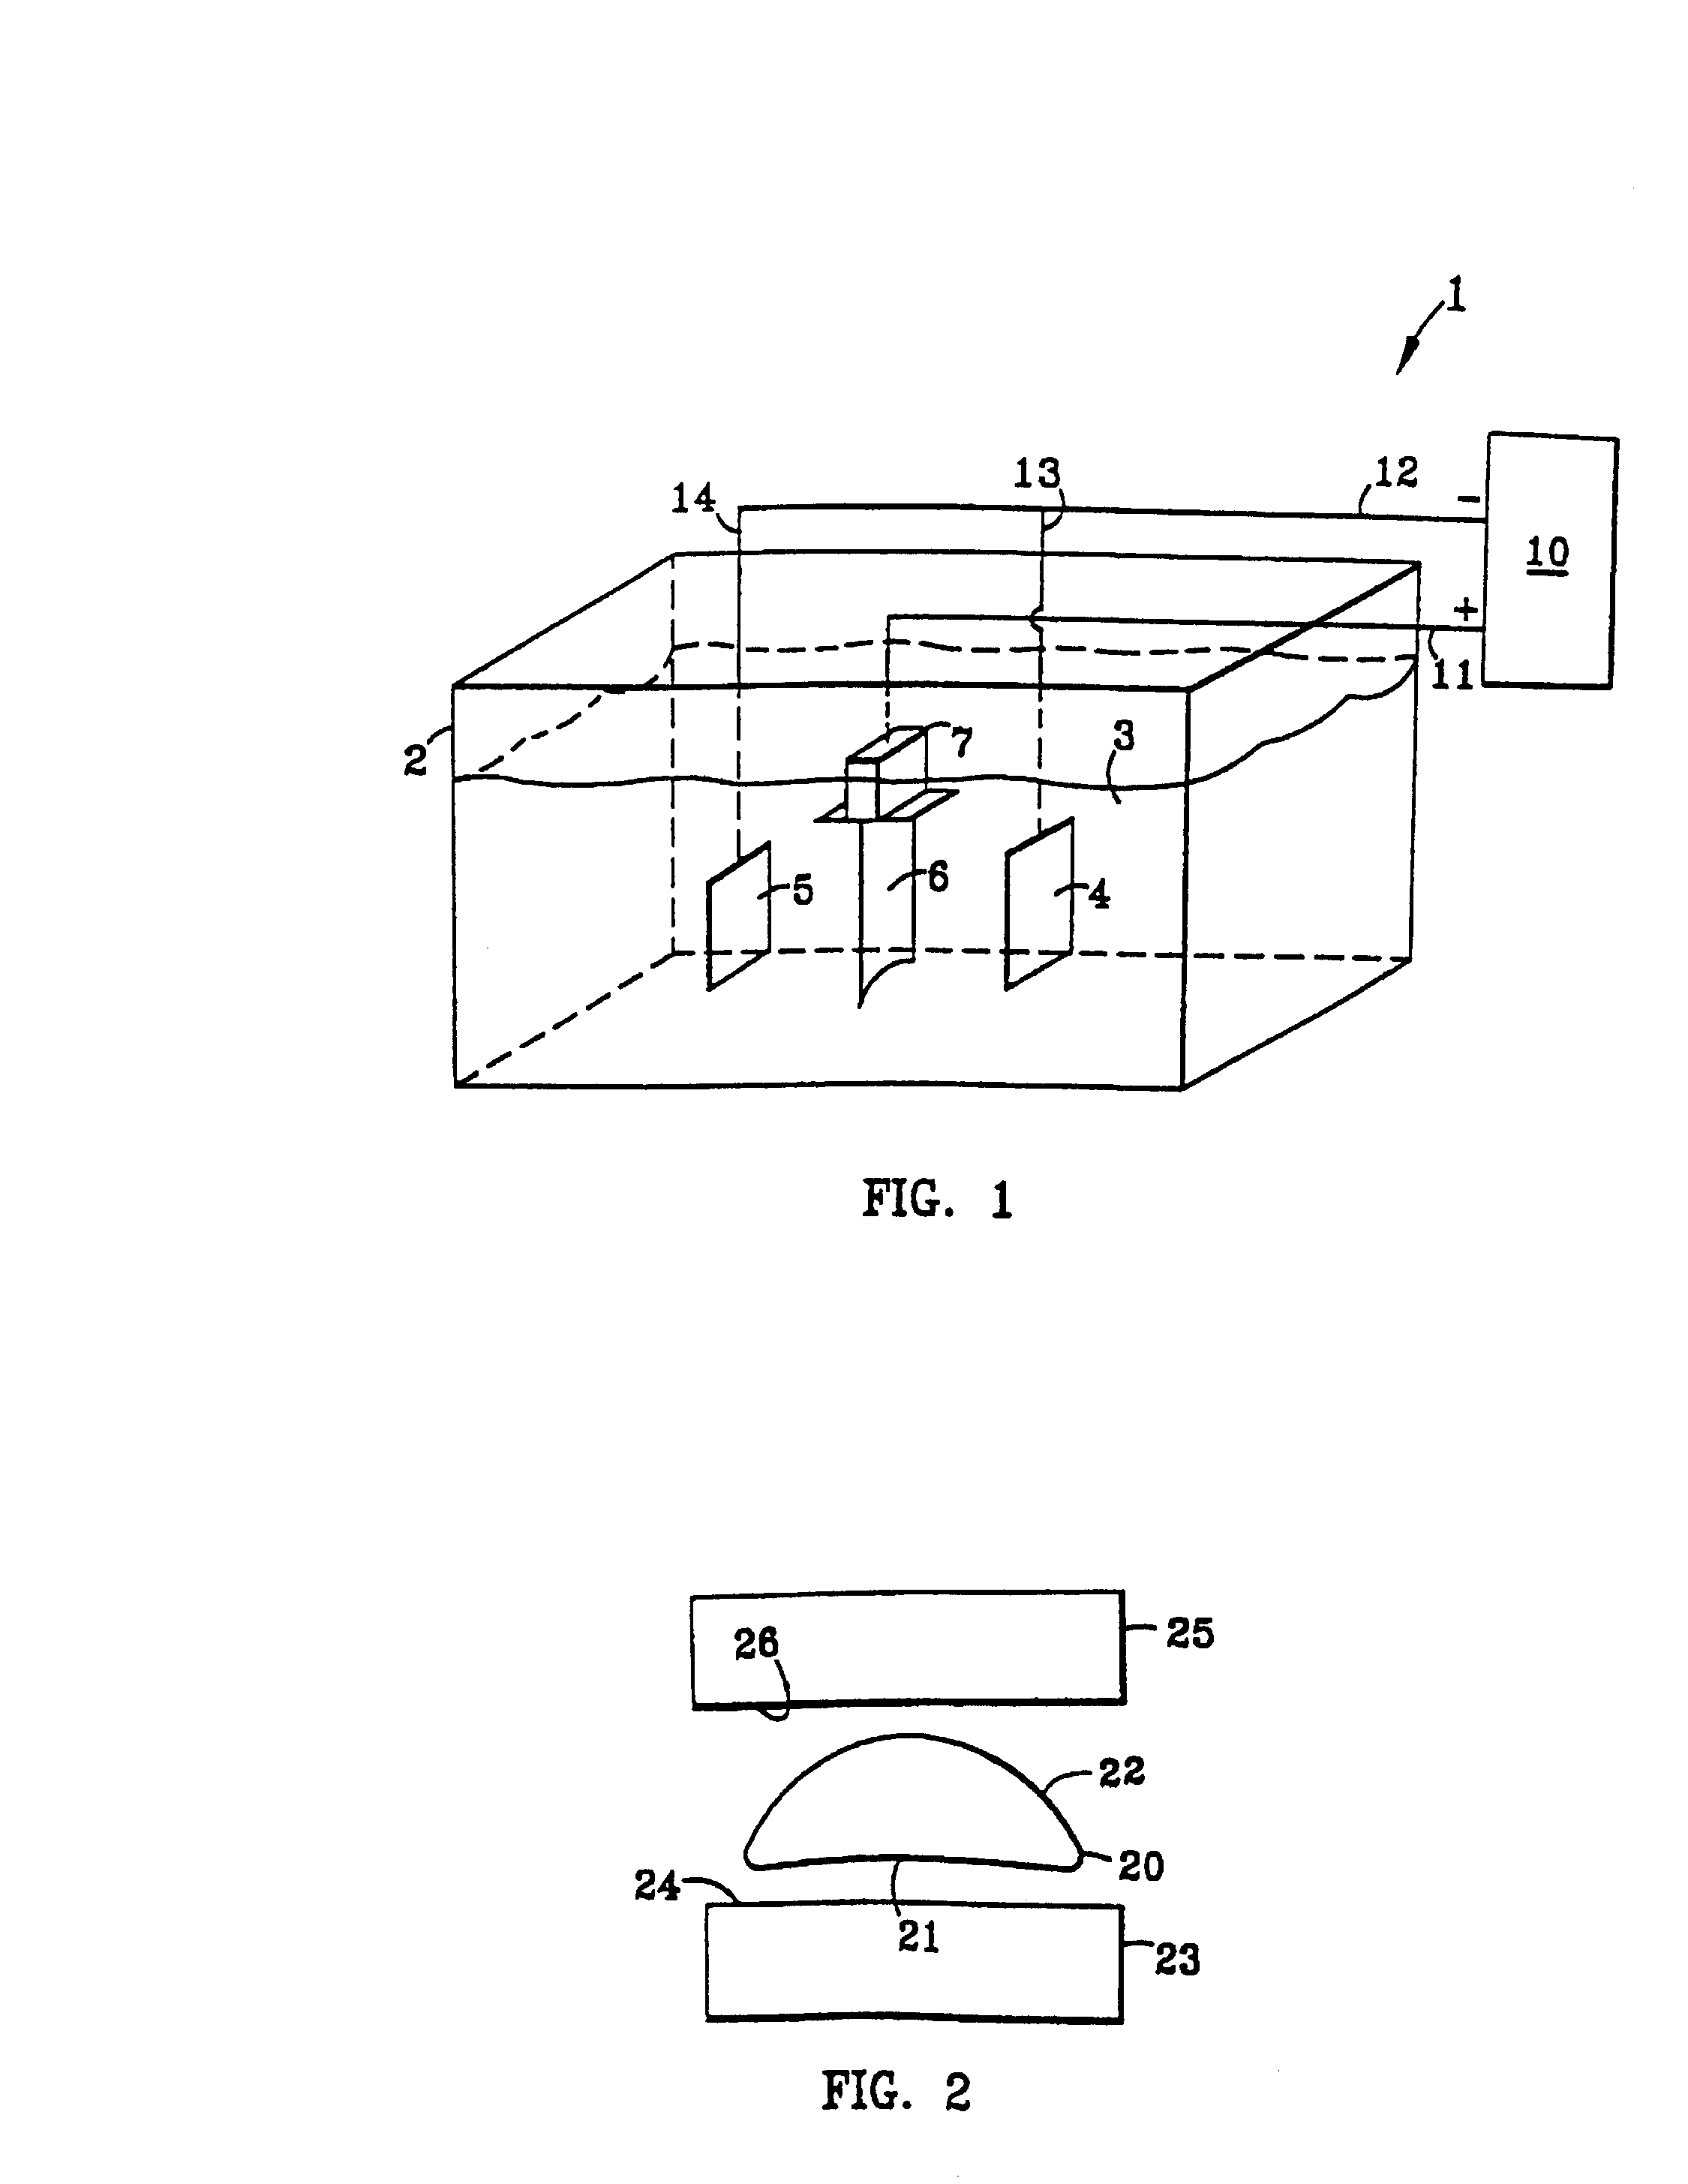 Method and apparatus for selectively removing coatings from substrates